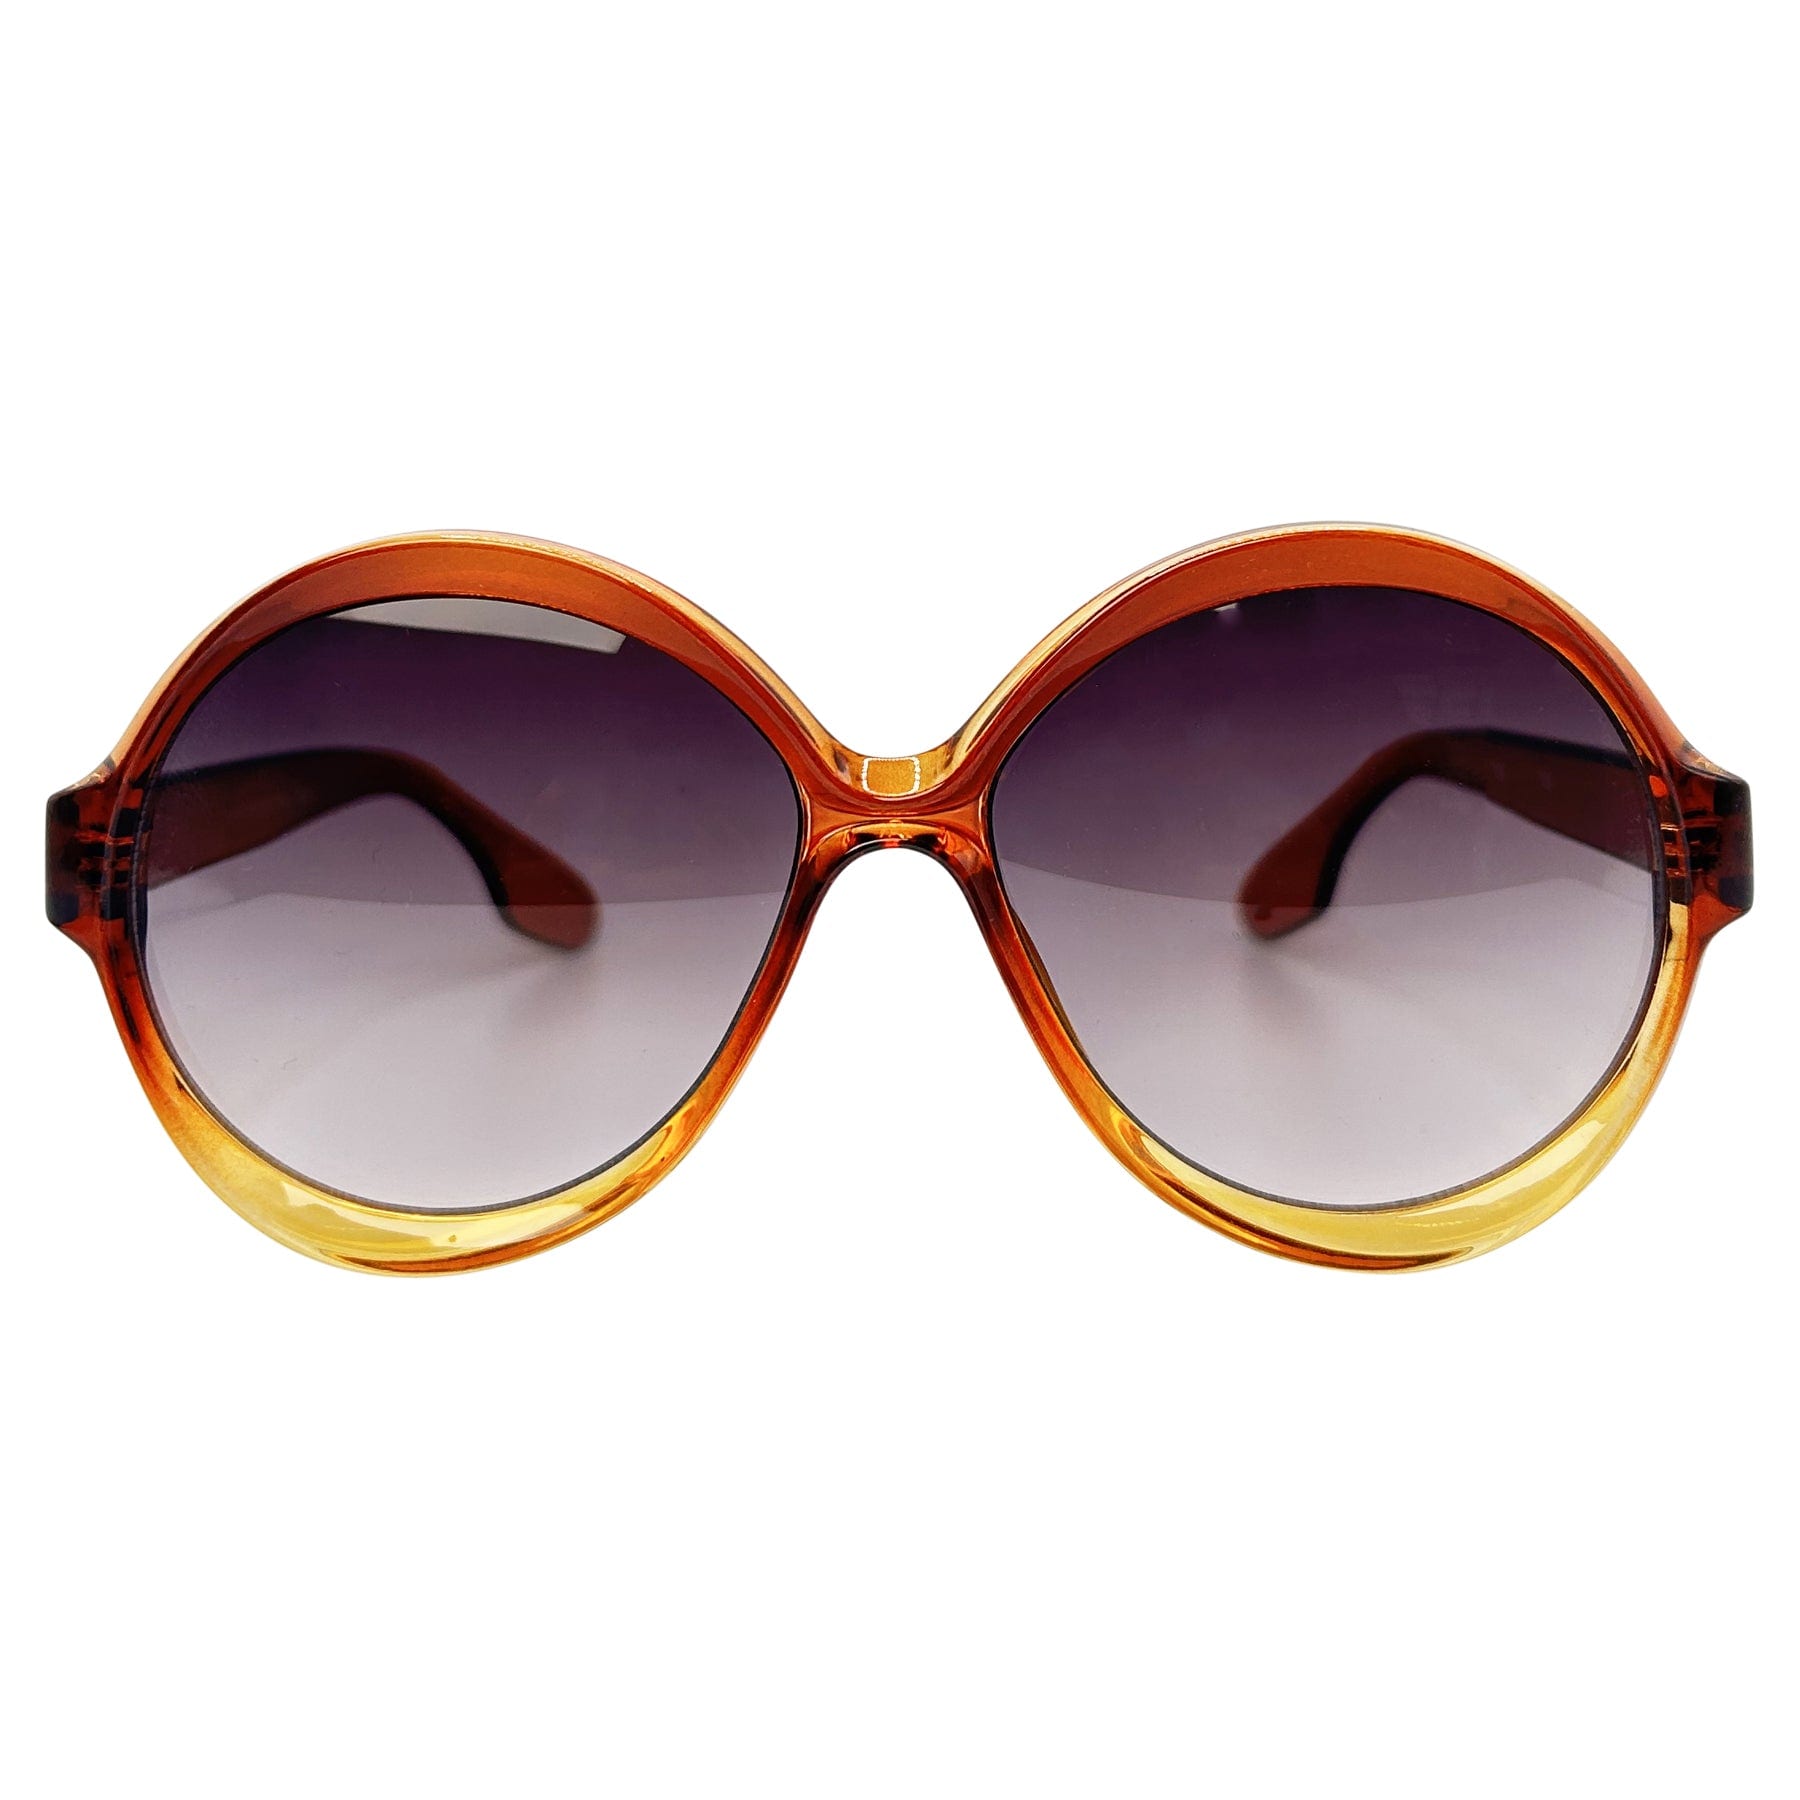 boho chic retro sunglasses with a round oversized colorful style frame